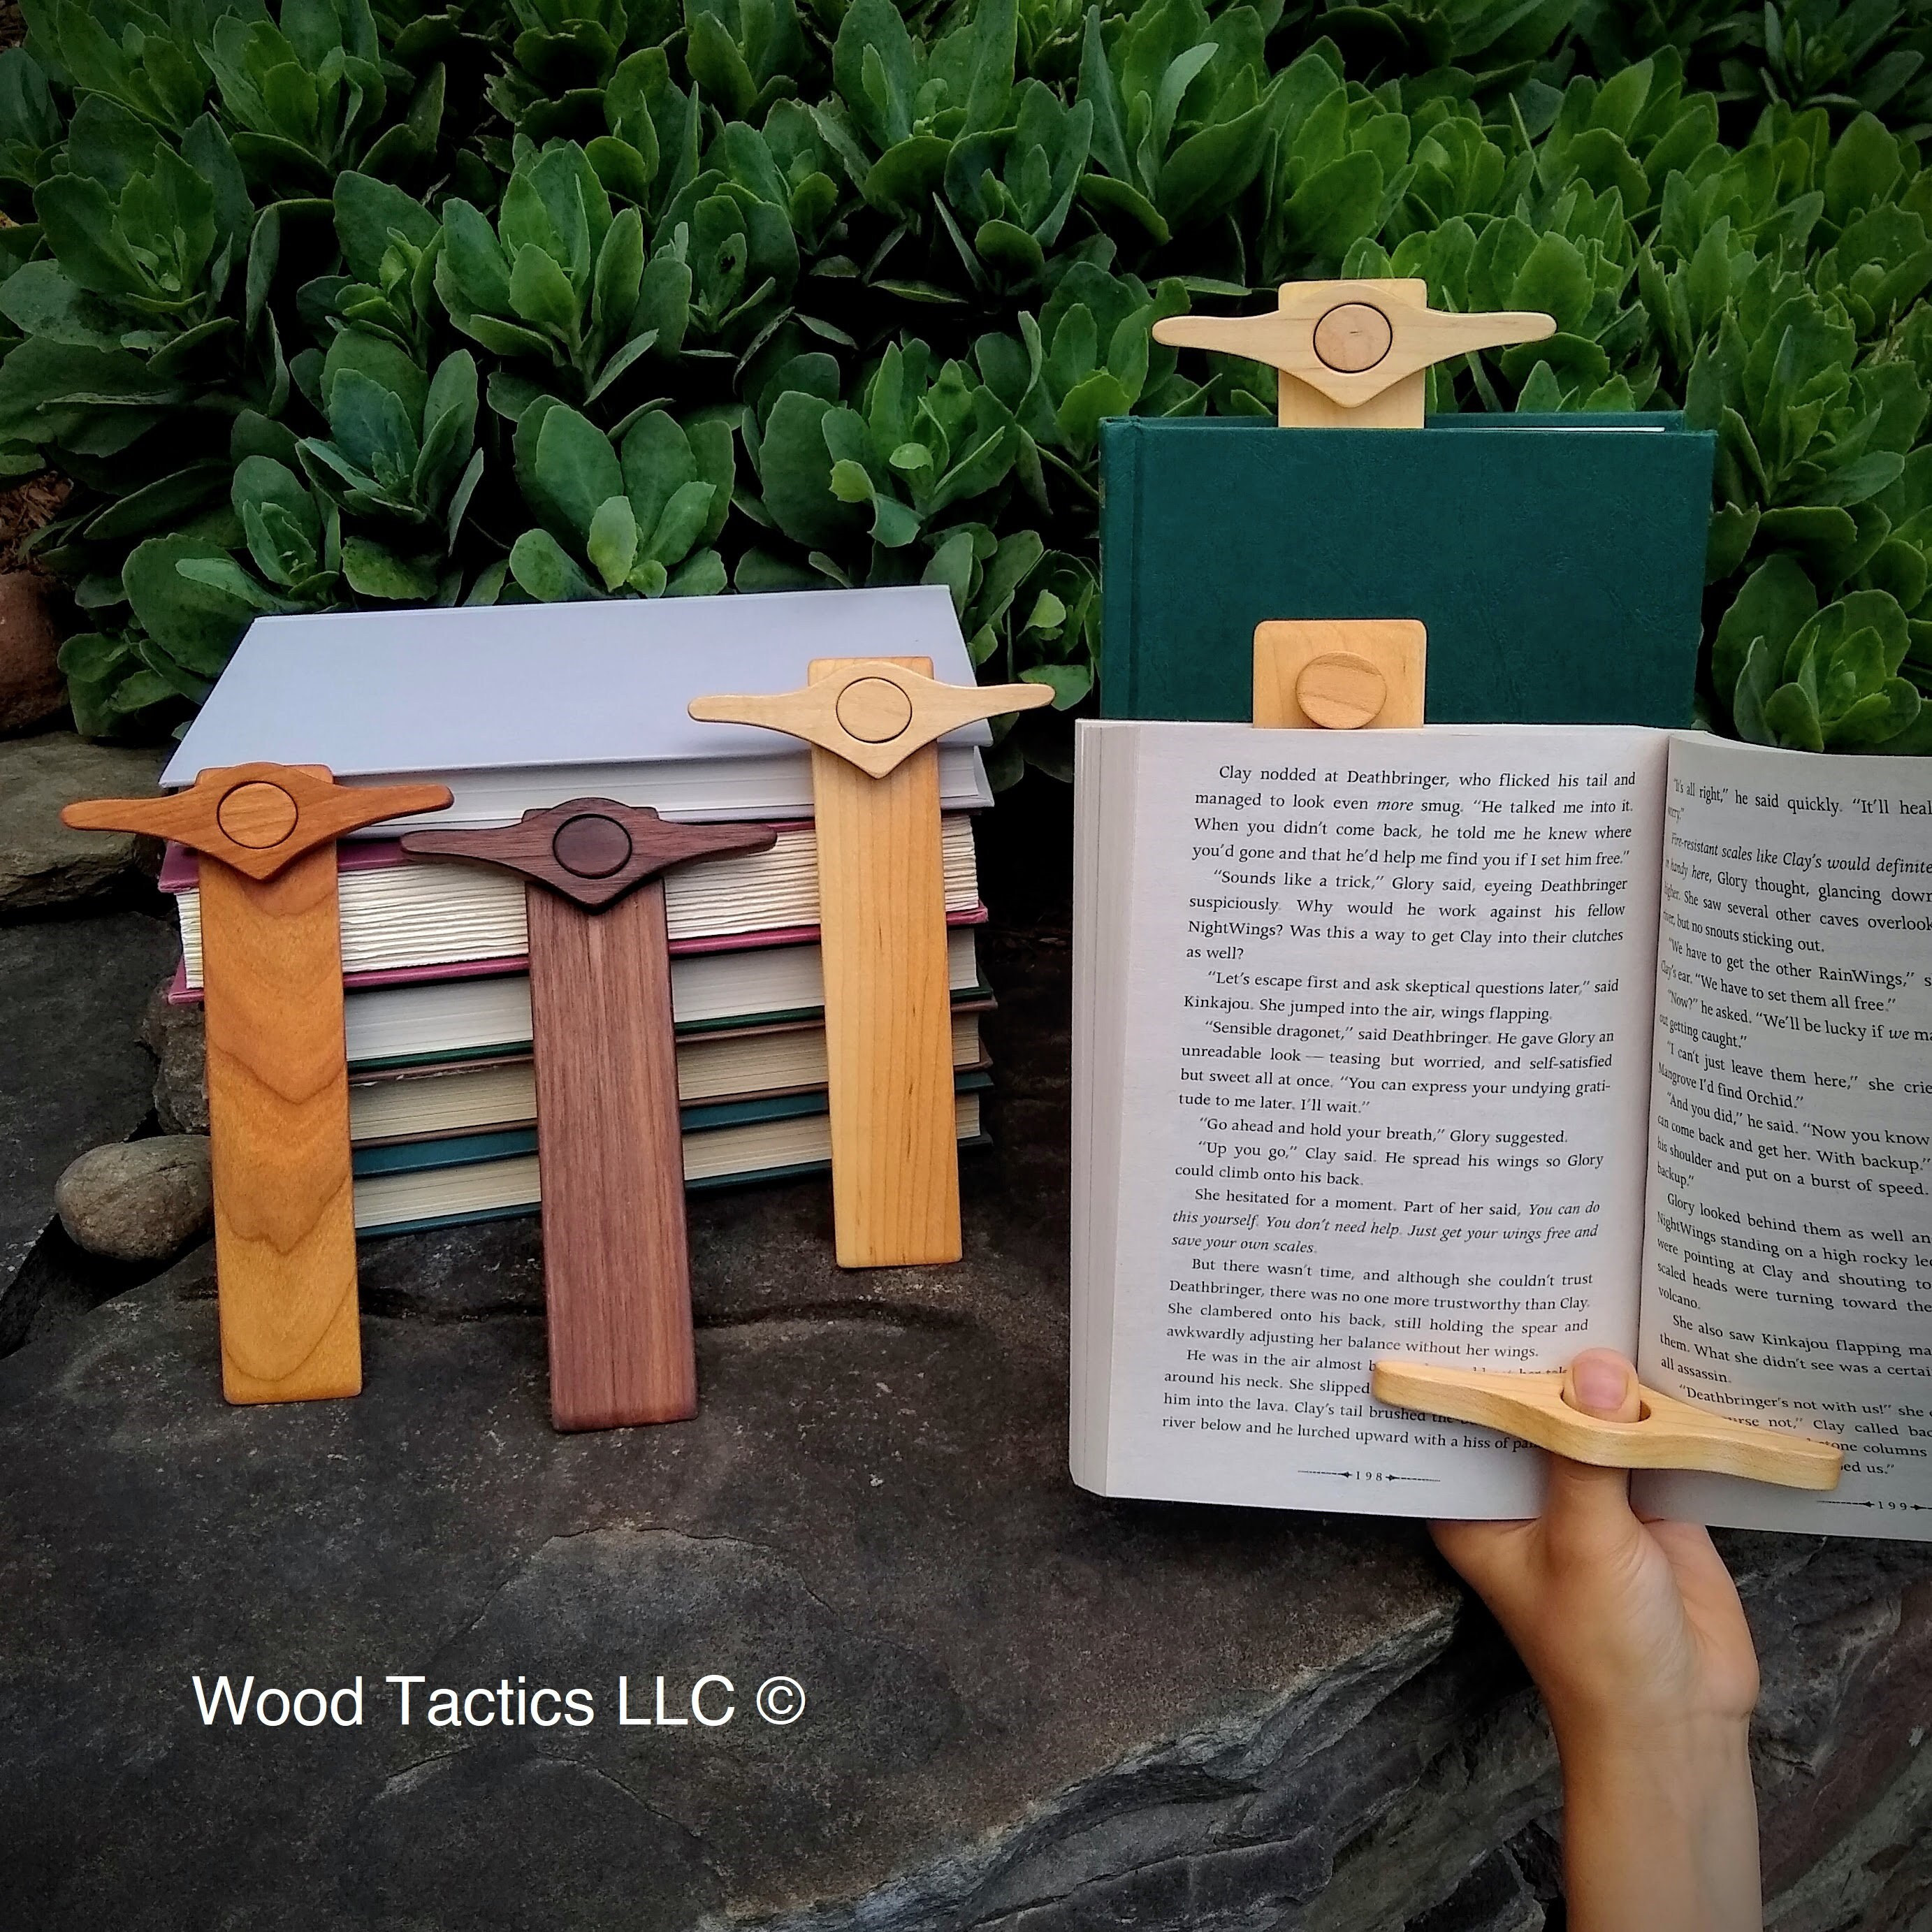 Wood Triangle Book Rest, Night Stand Book Holder, Personalized Book Stand,  Book Holder, Book Rest With Drink Holder, Gift for Her 